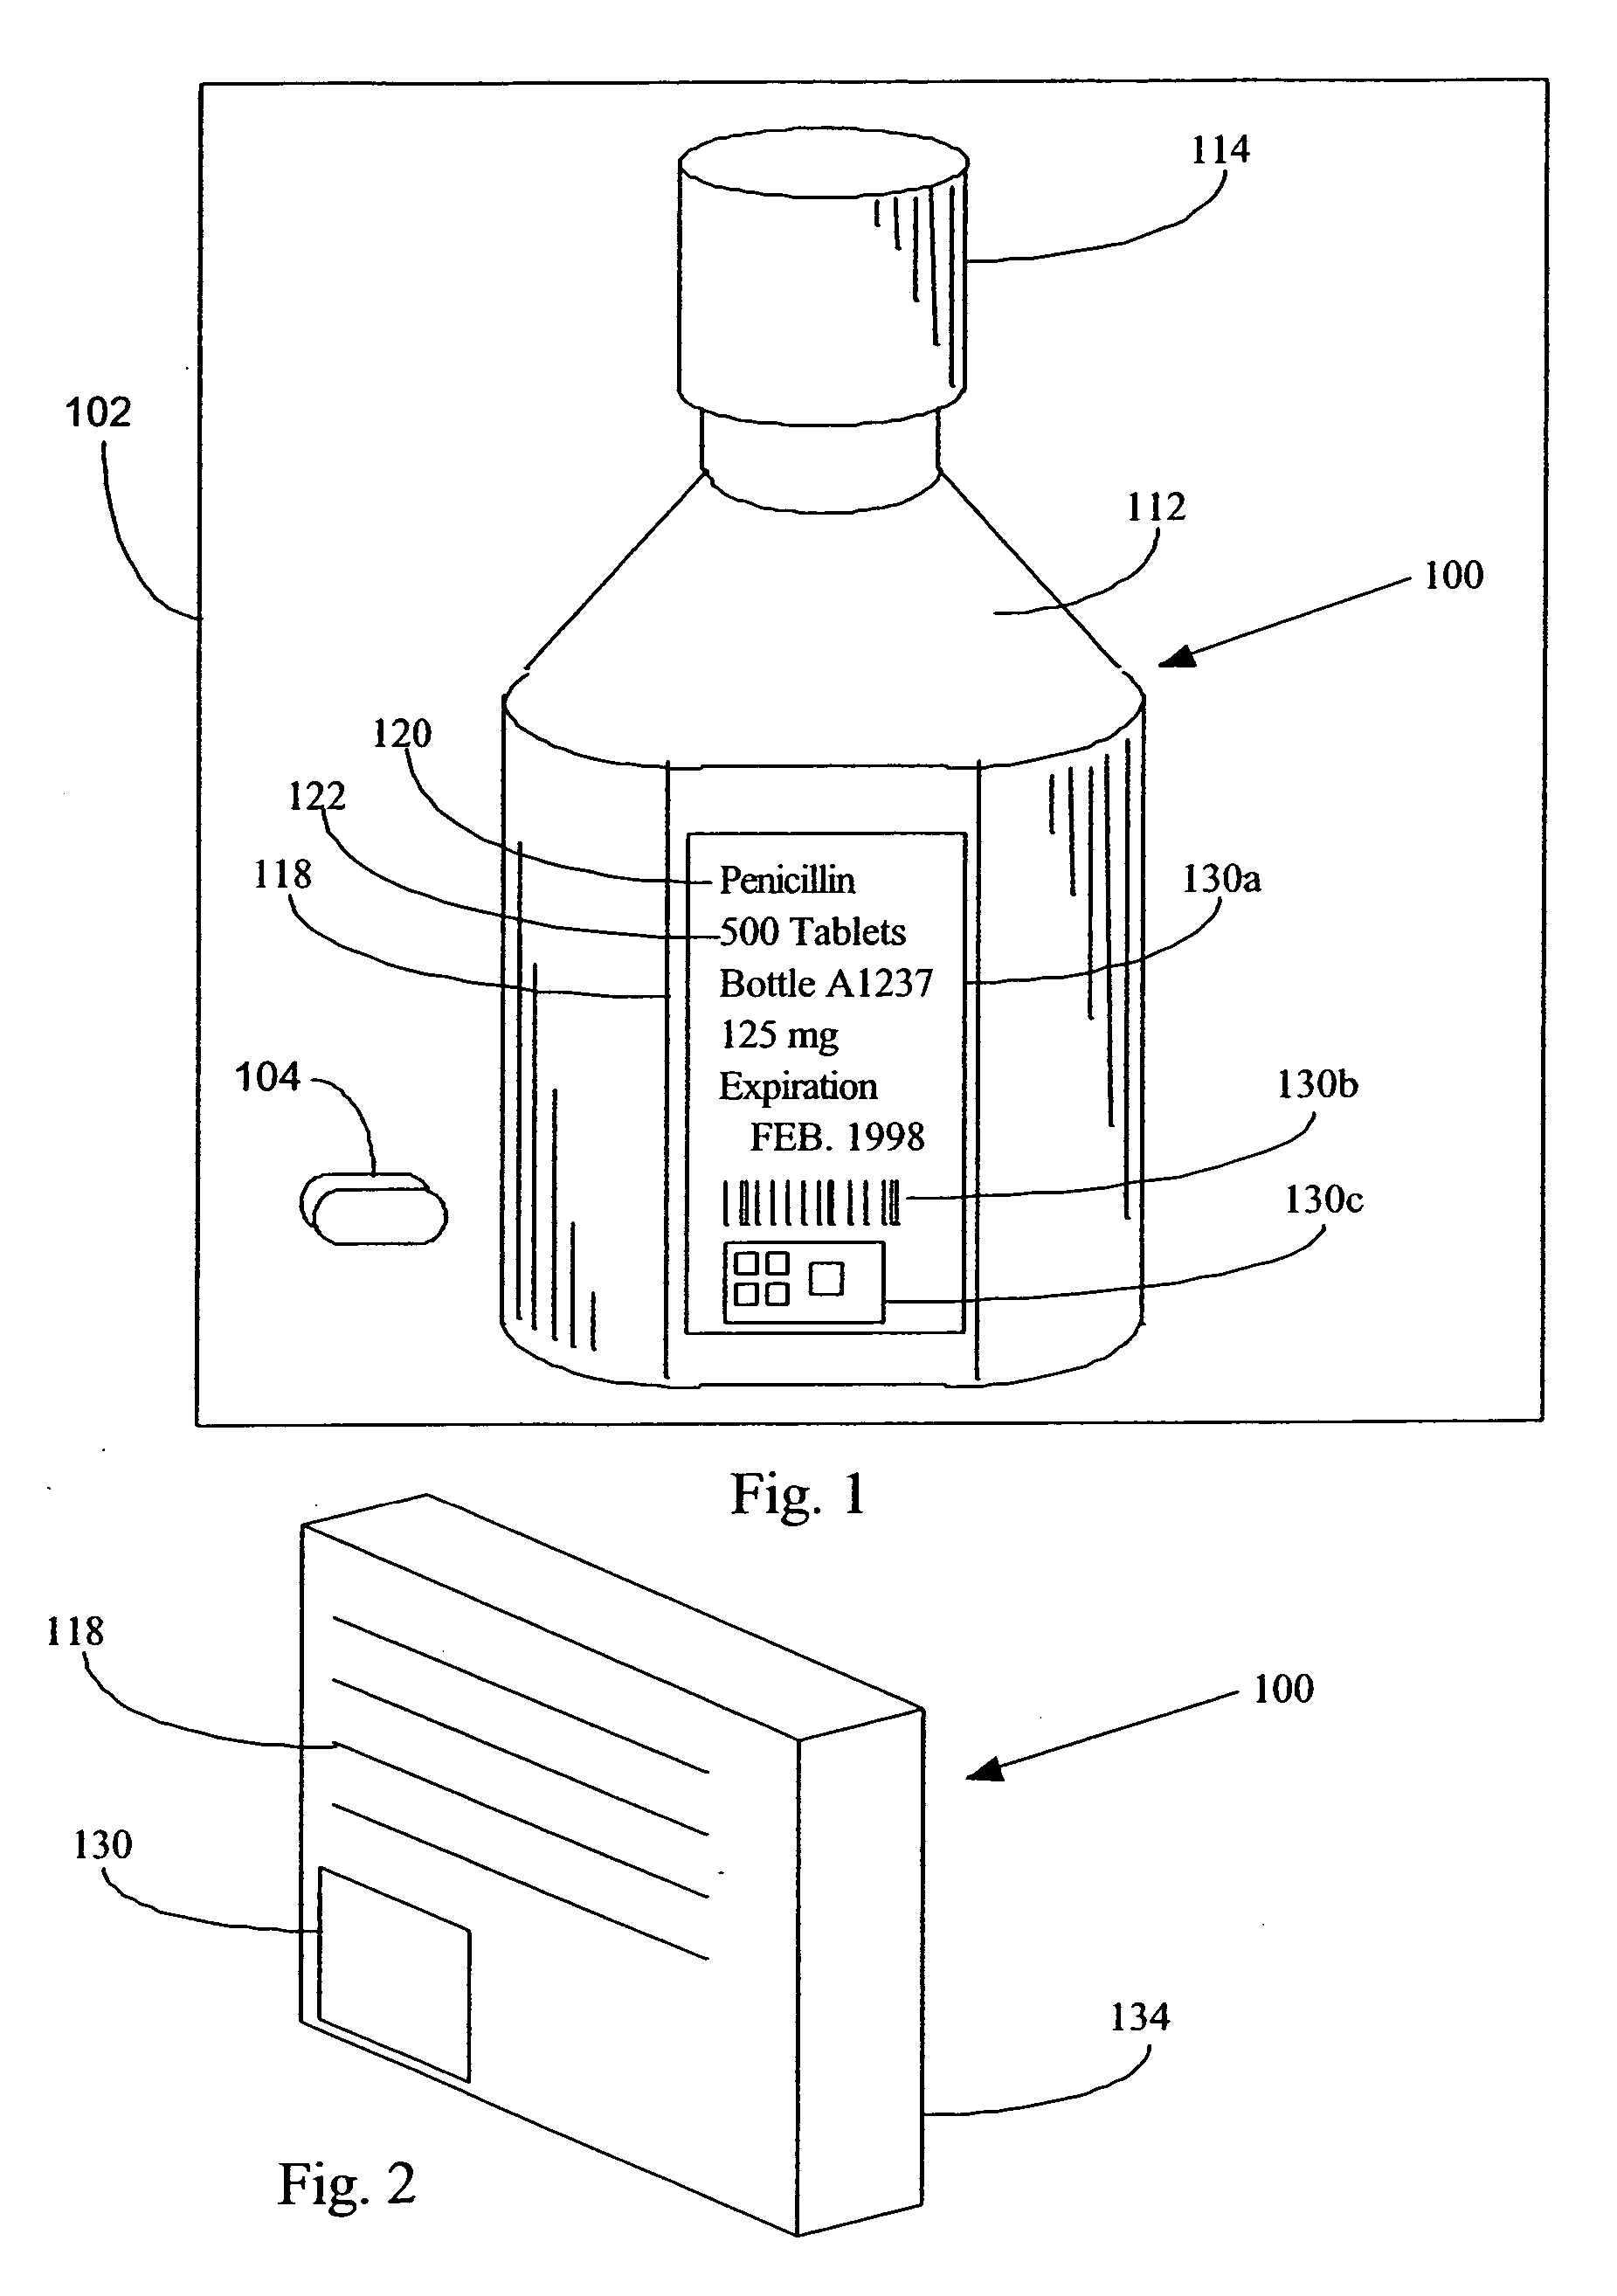 Method and system for tracking and verifying medication